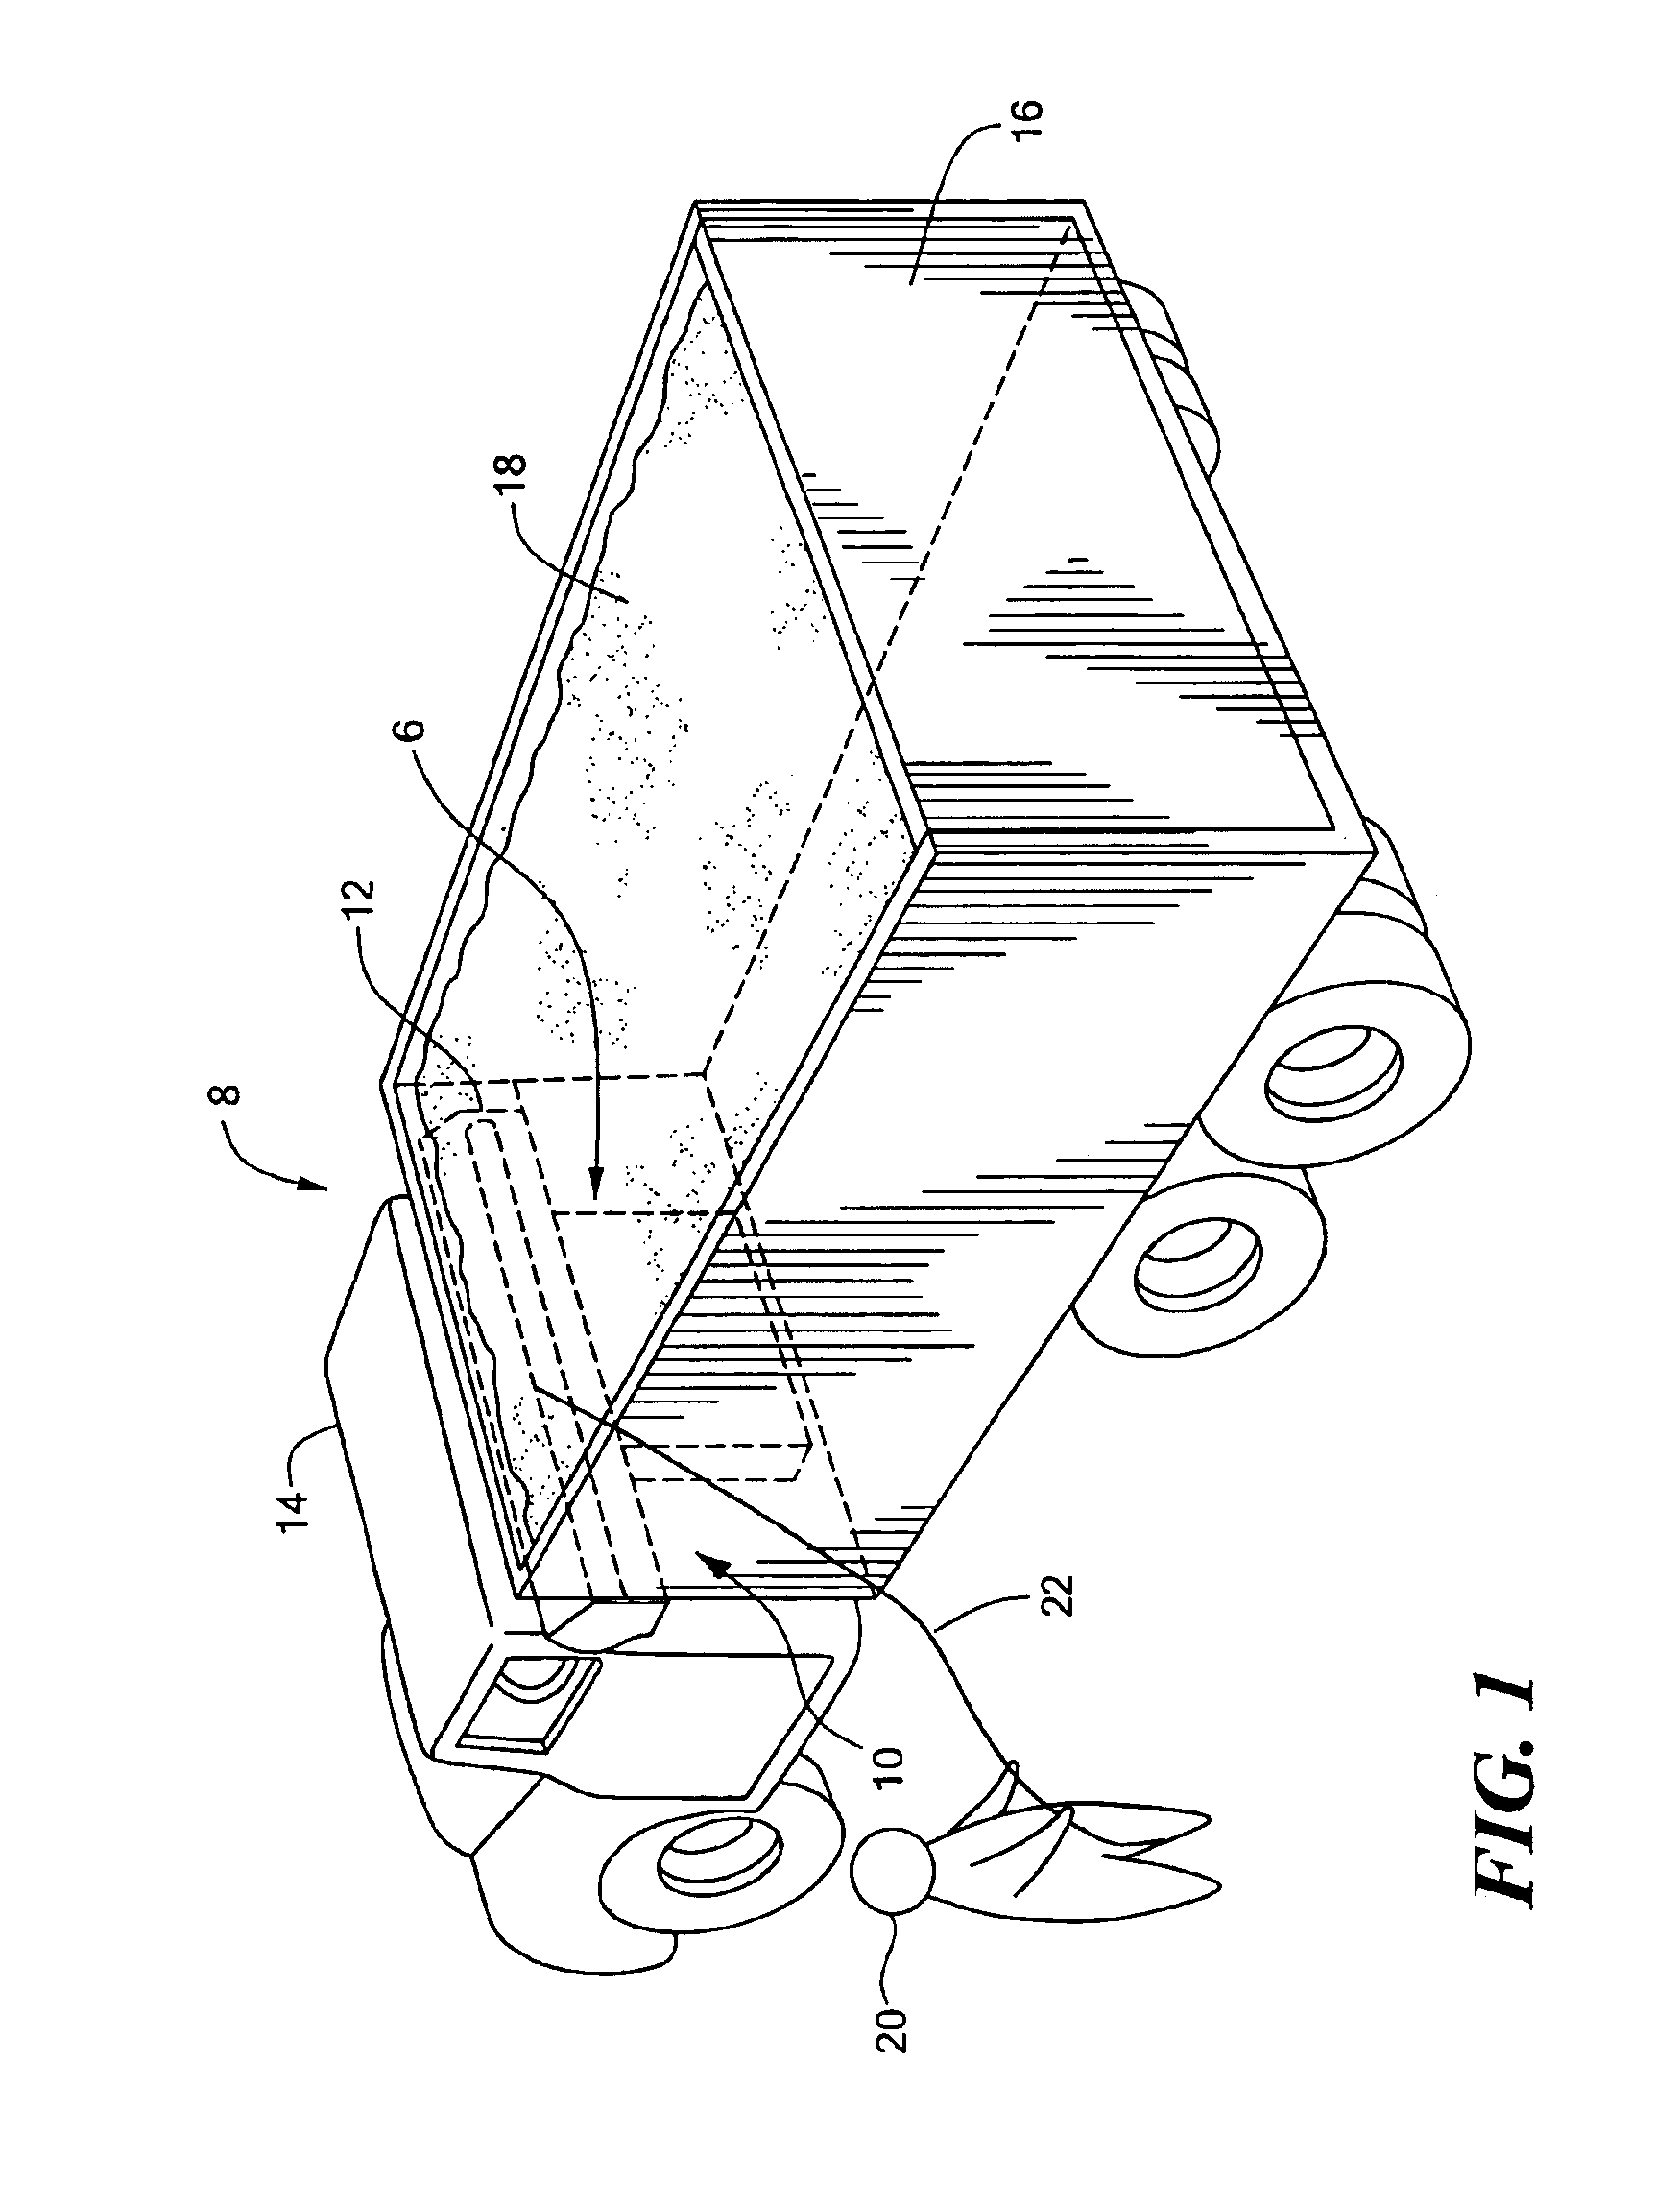 Variable height covering system